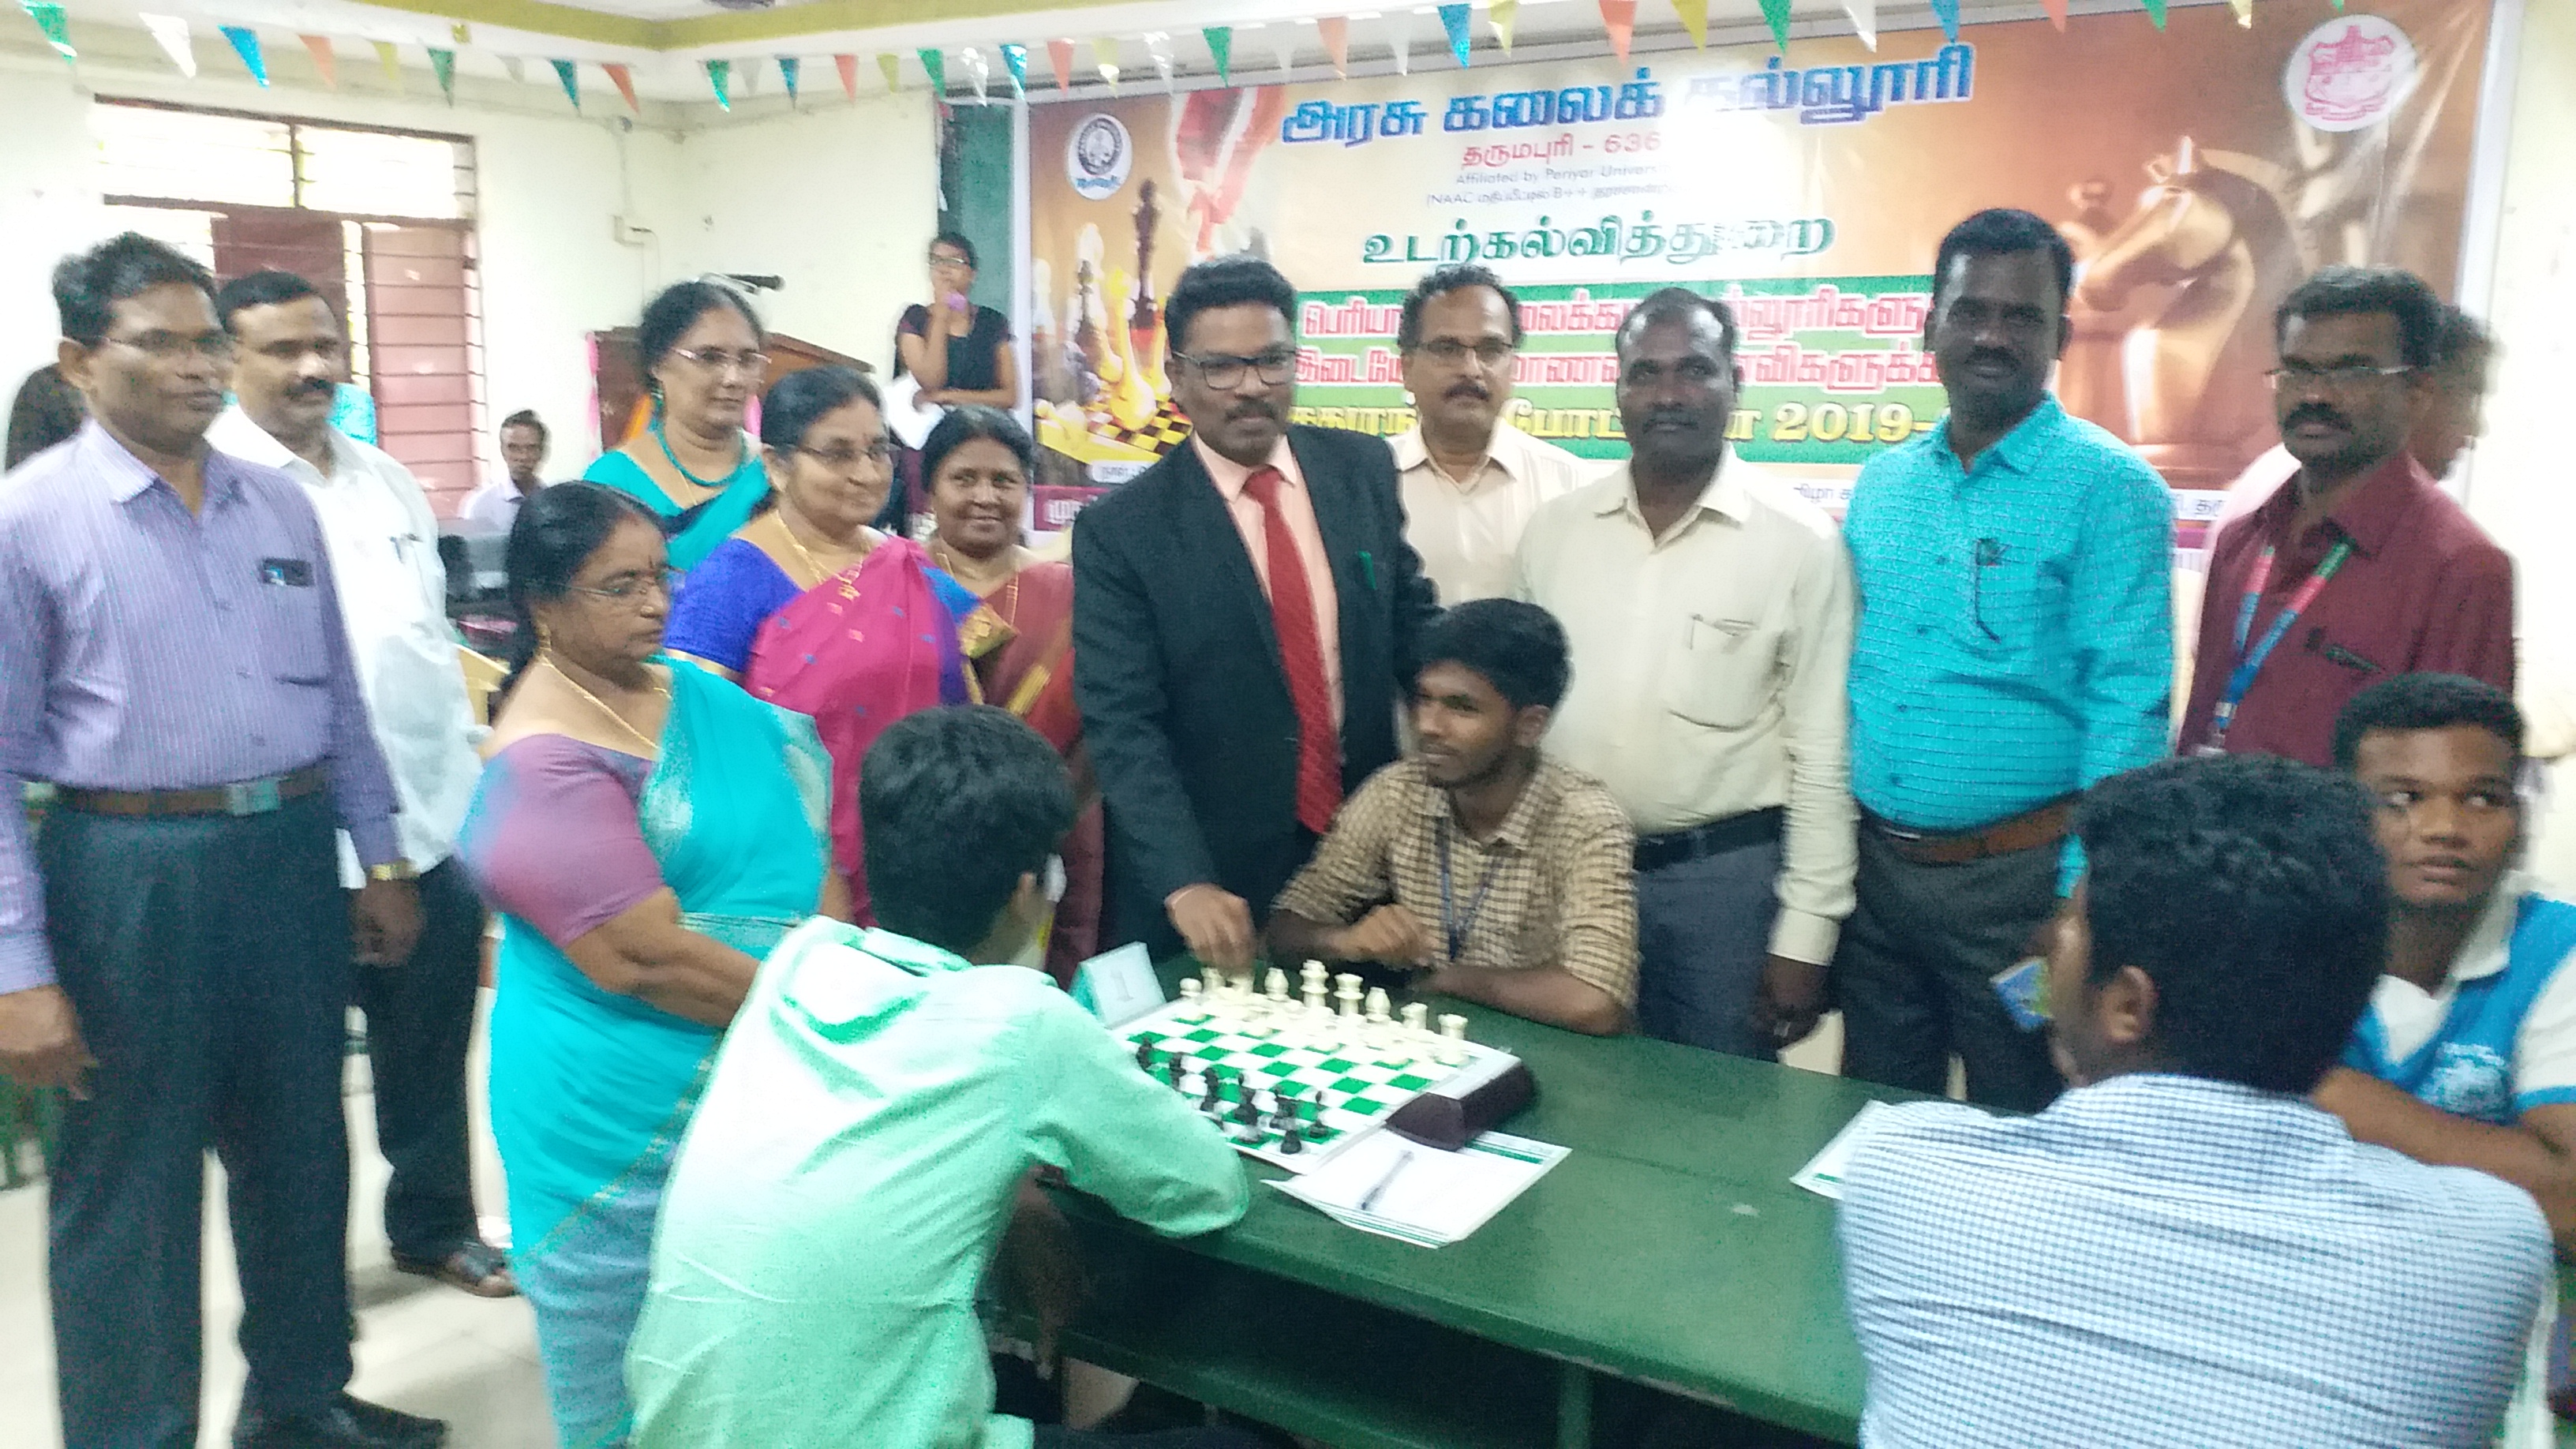 Chess competition inauguration